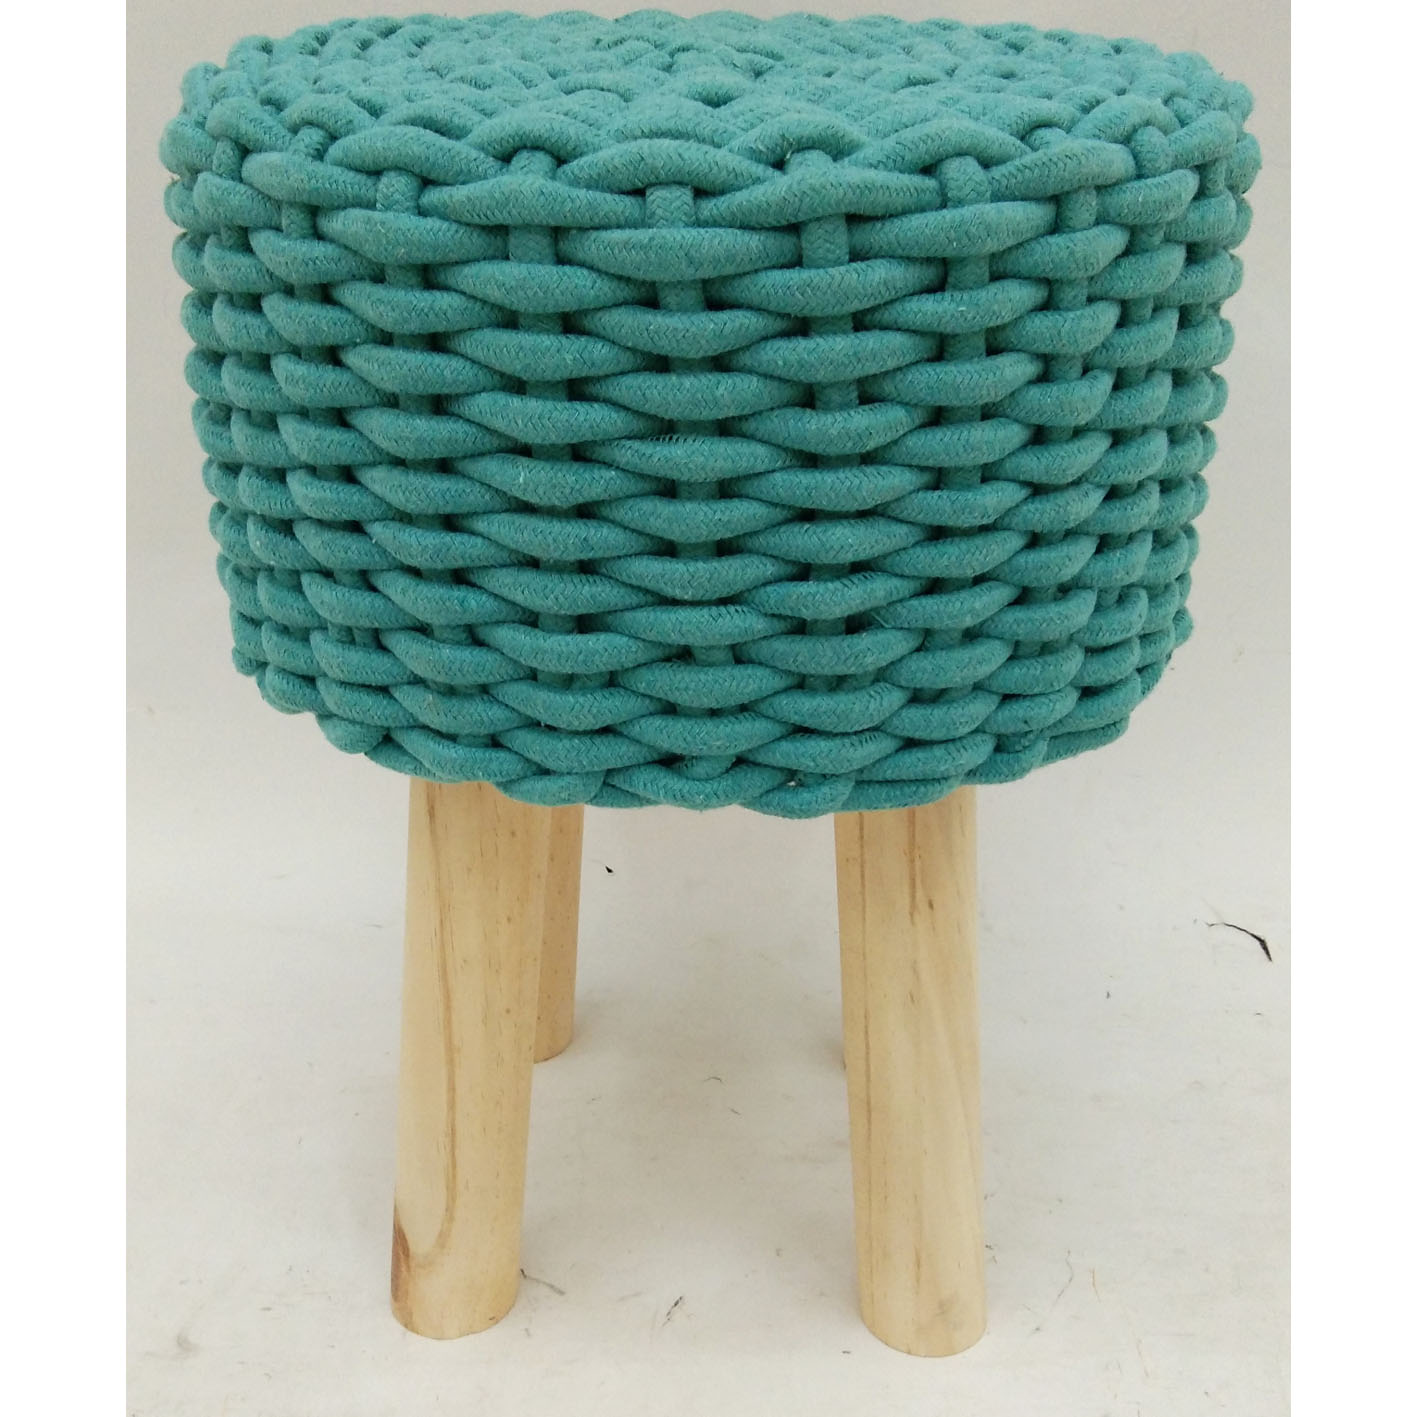 Cotton rope weaving ottoman with wood legs